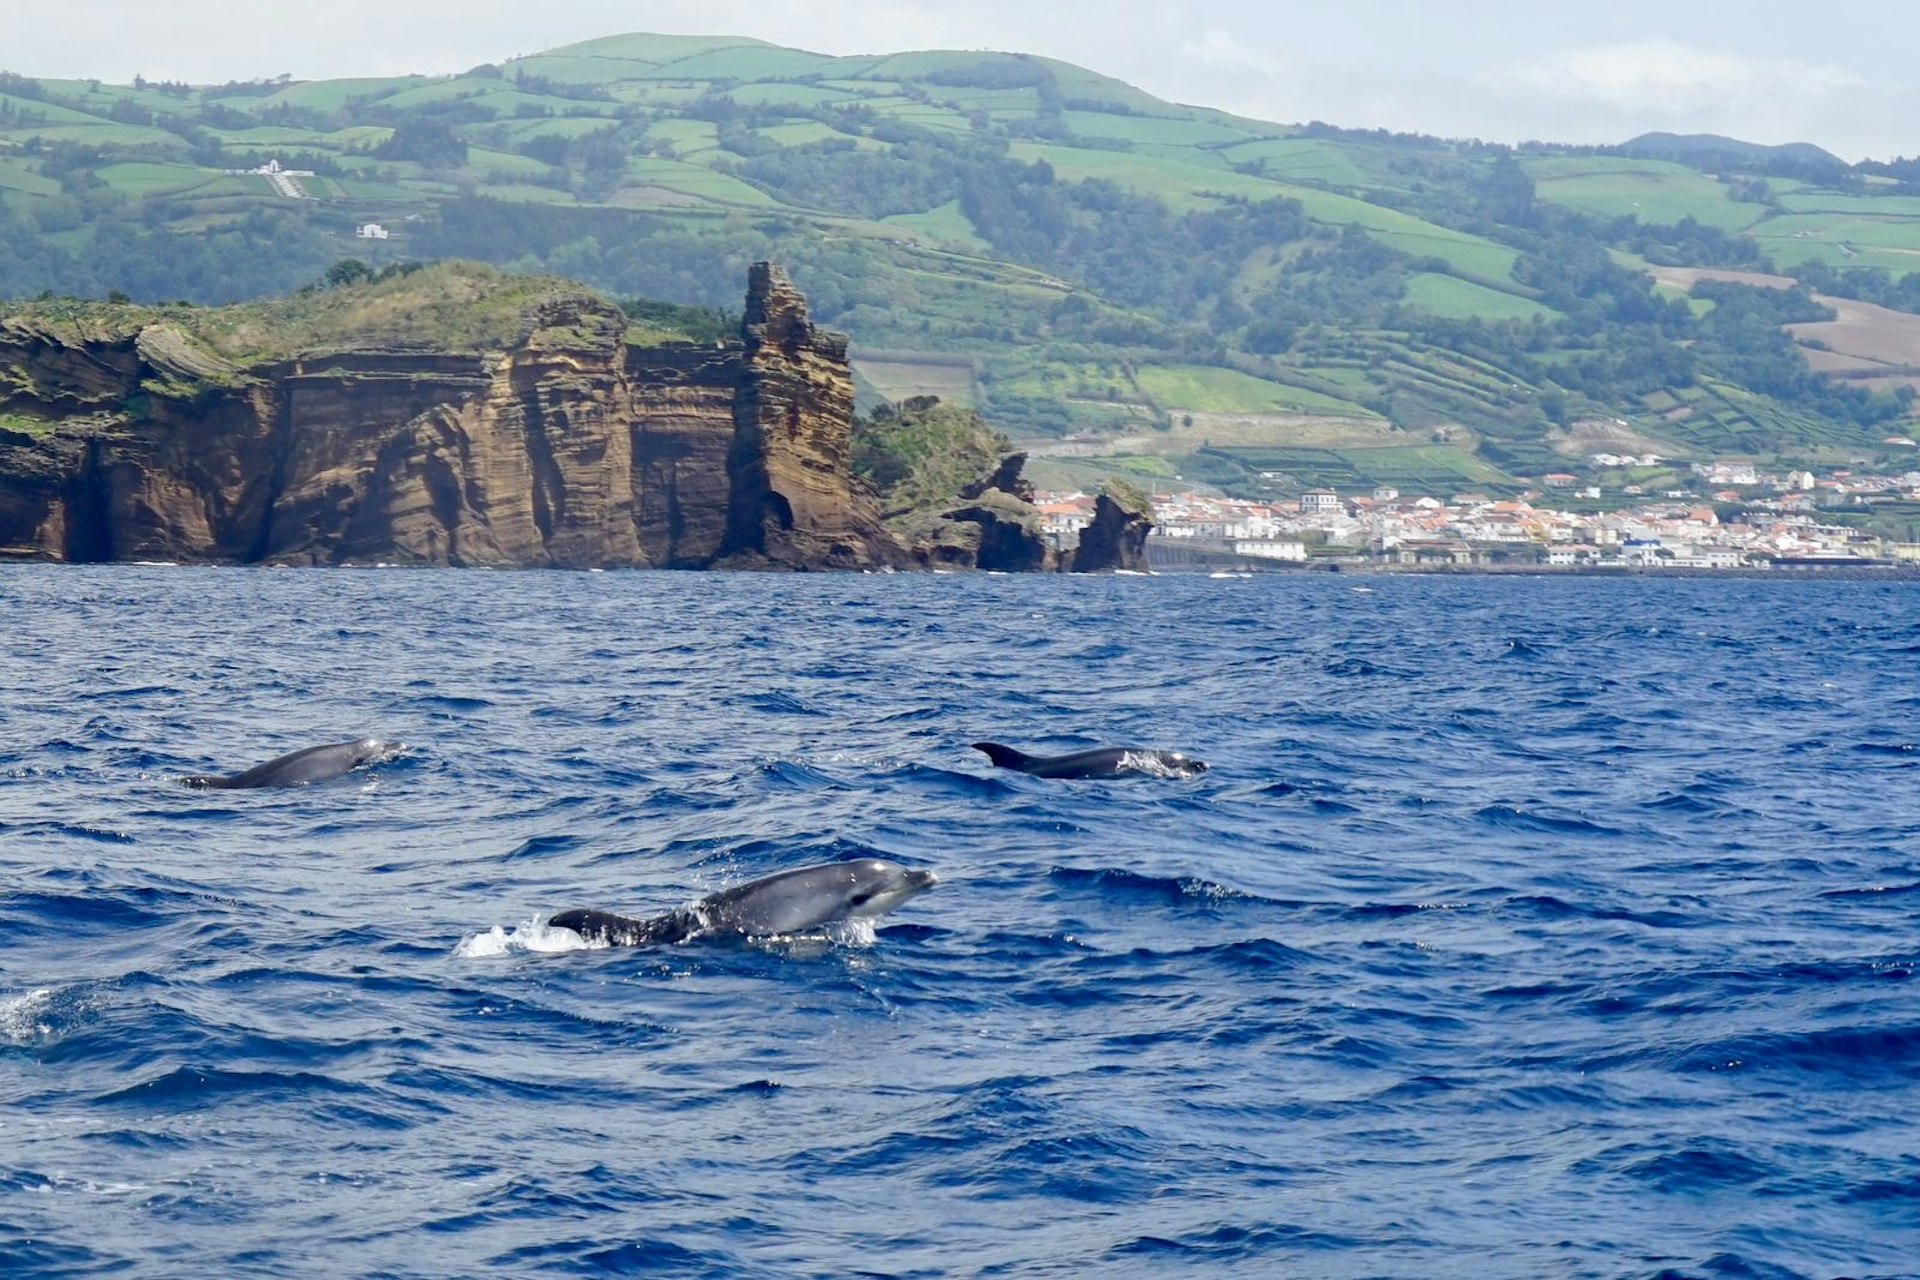 Bottlenose dolphins in the Azores, Portugal